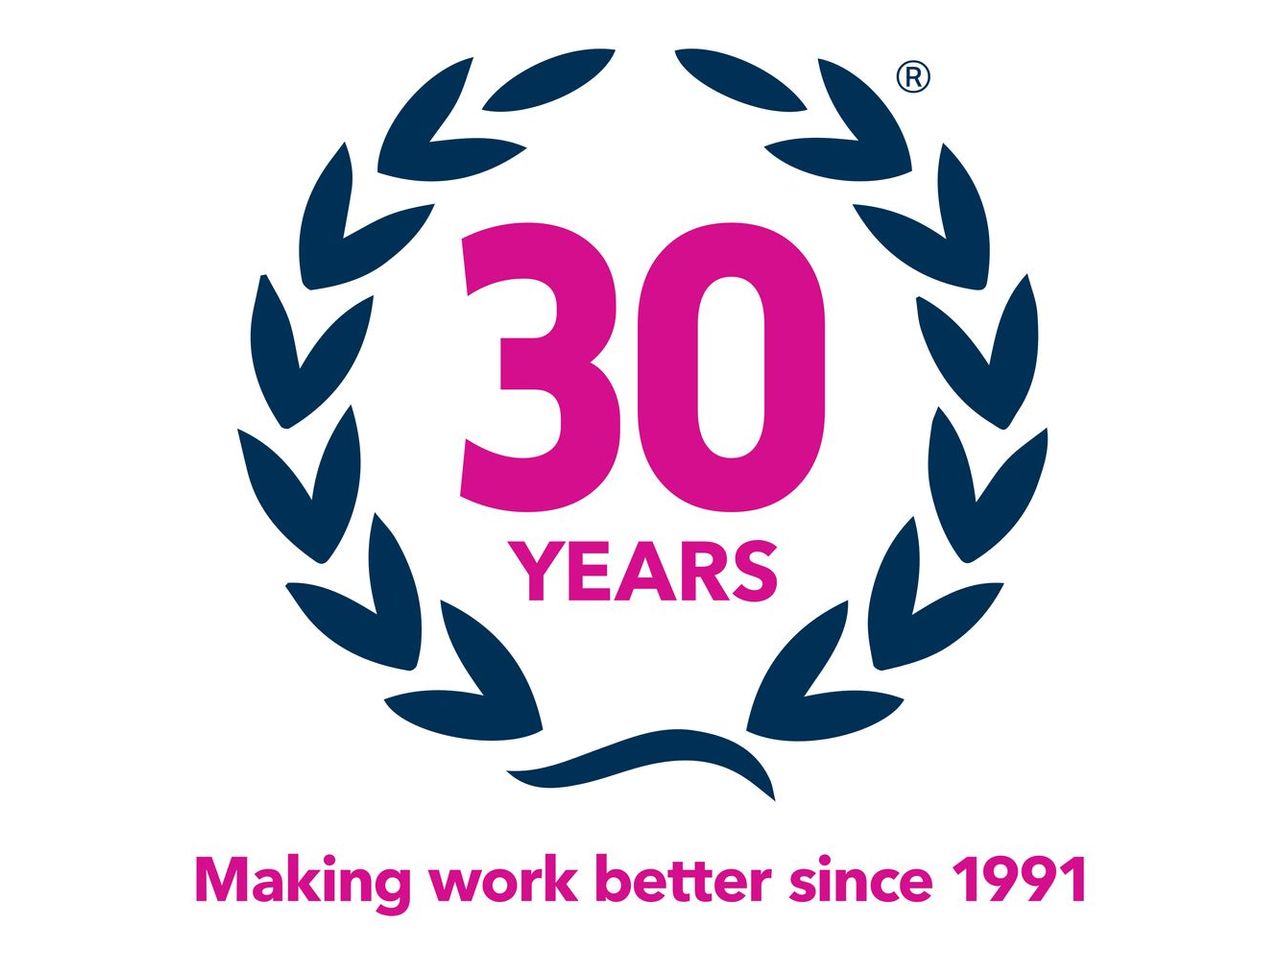 Investors in People invites businesses to celebrate its 30th birthday